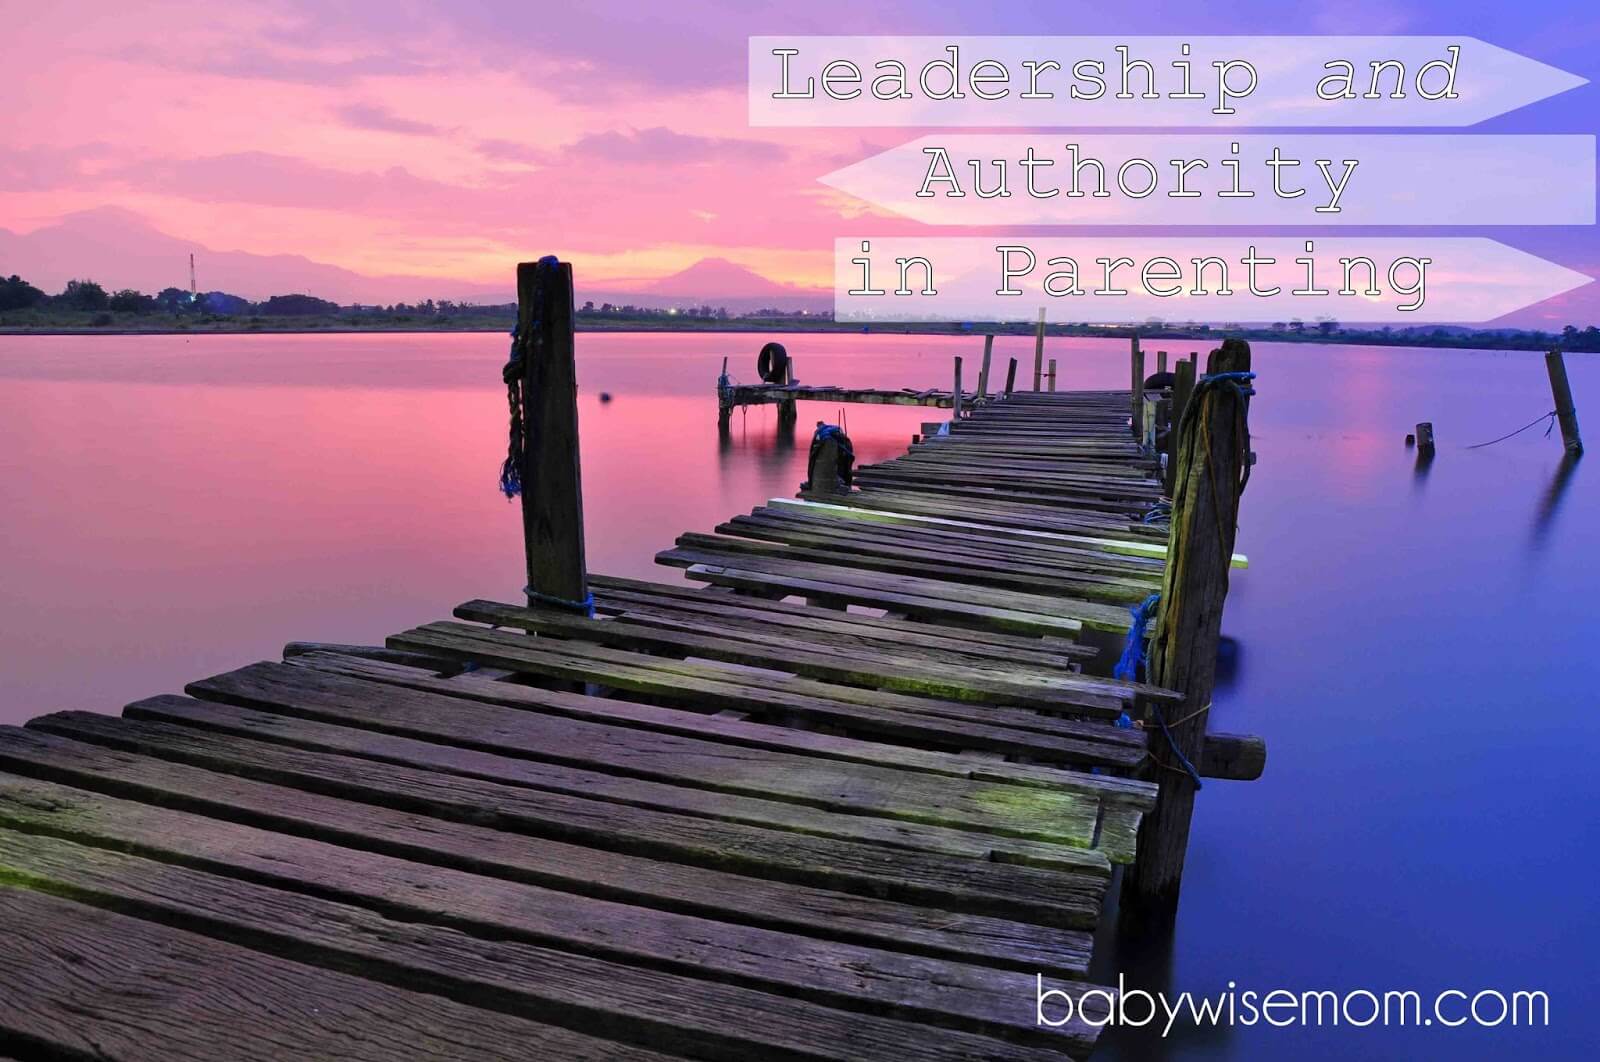 Leadership and Authority in Parenting. When and how to use authority and when to use leadership in parenting. Sometimes you let the child decide and sometimes you decide.